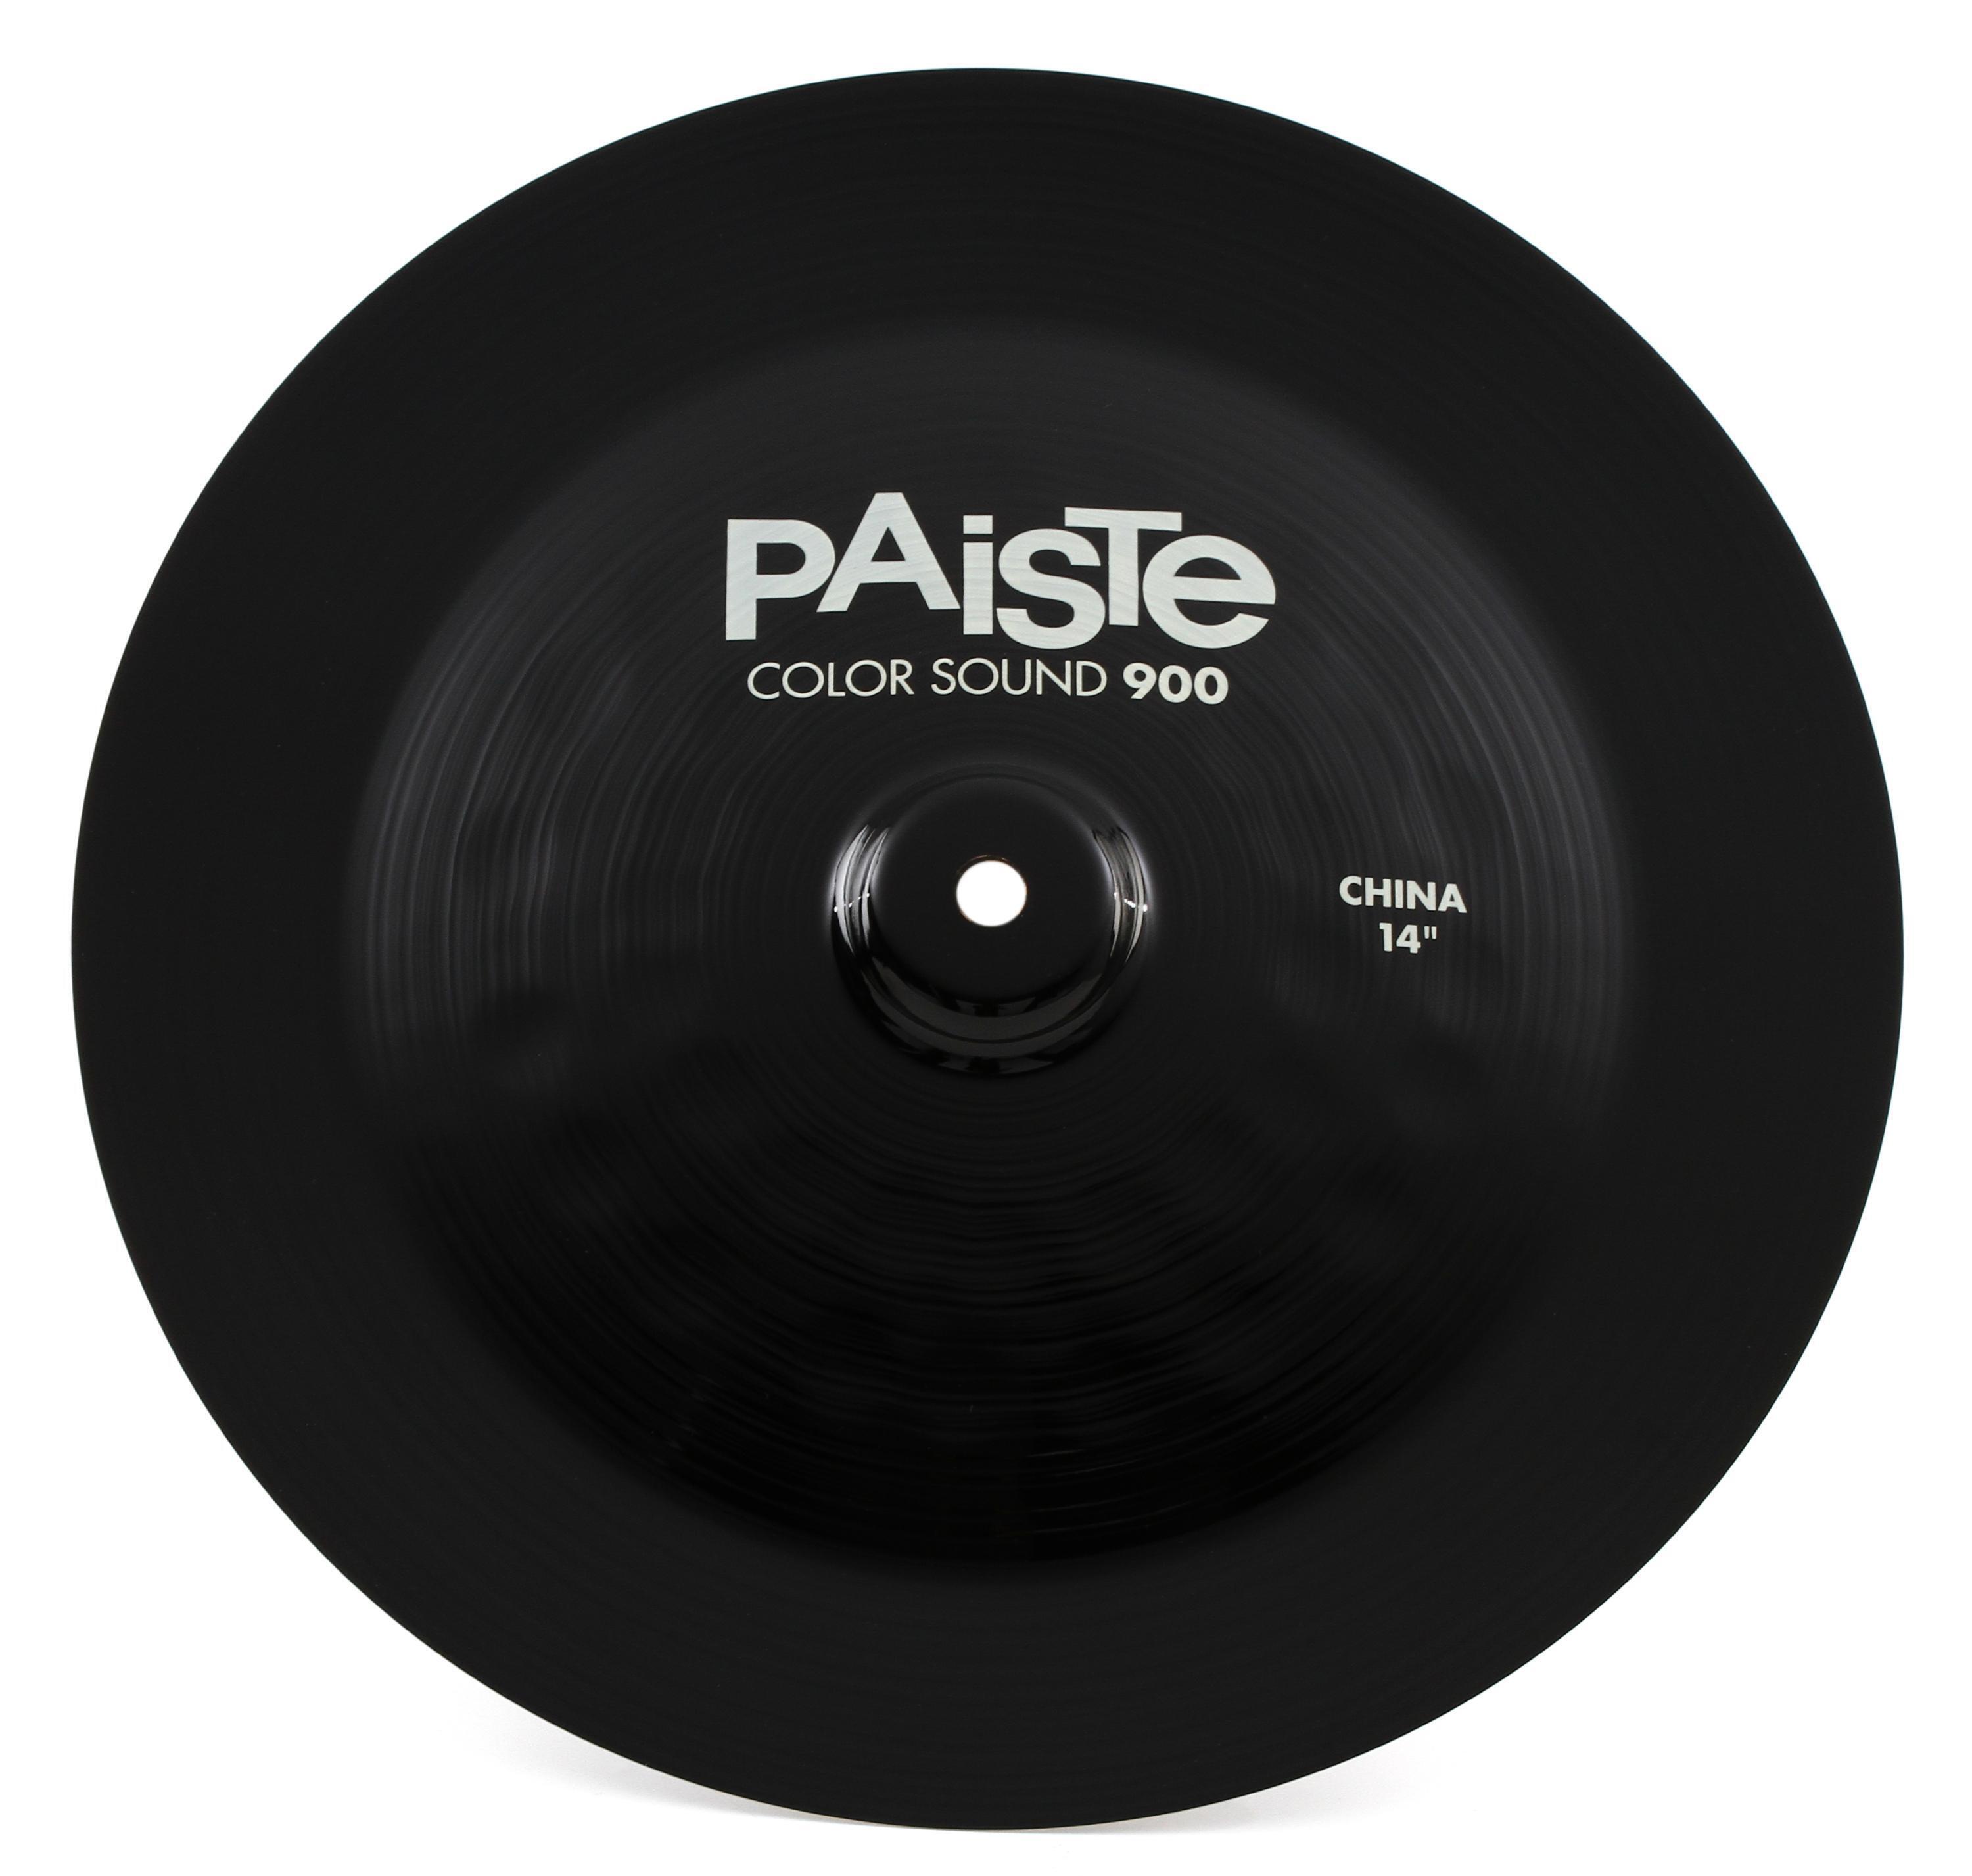 Paiste 14 inch Color Sound 900 Black China Cymbal